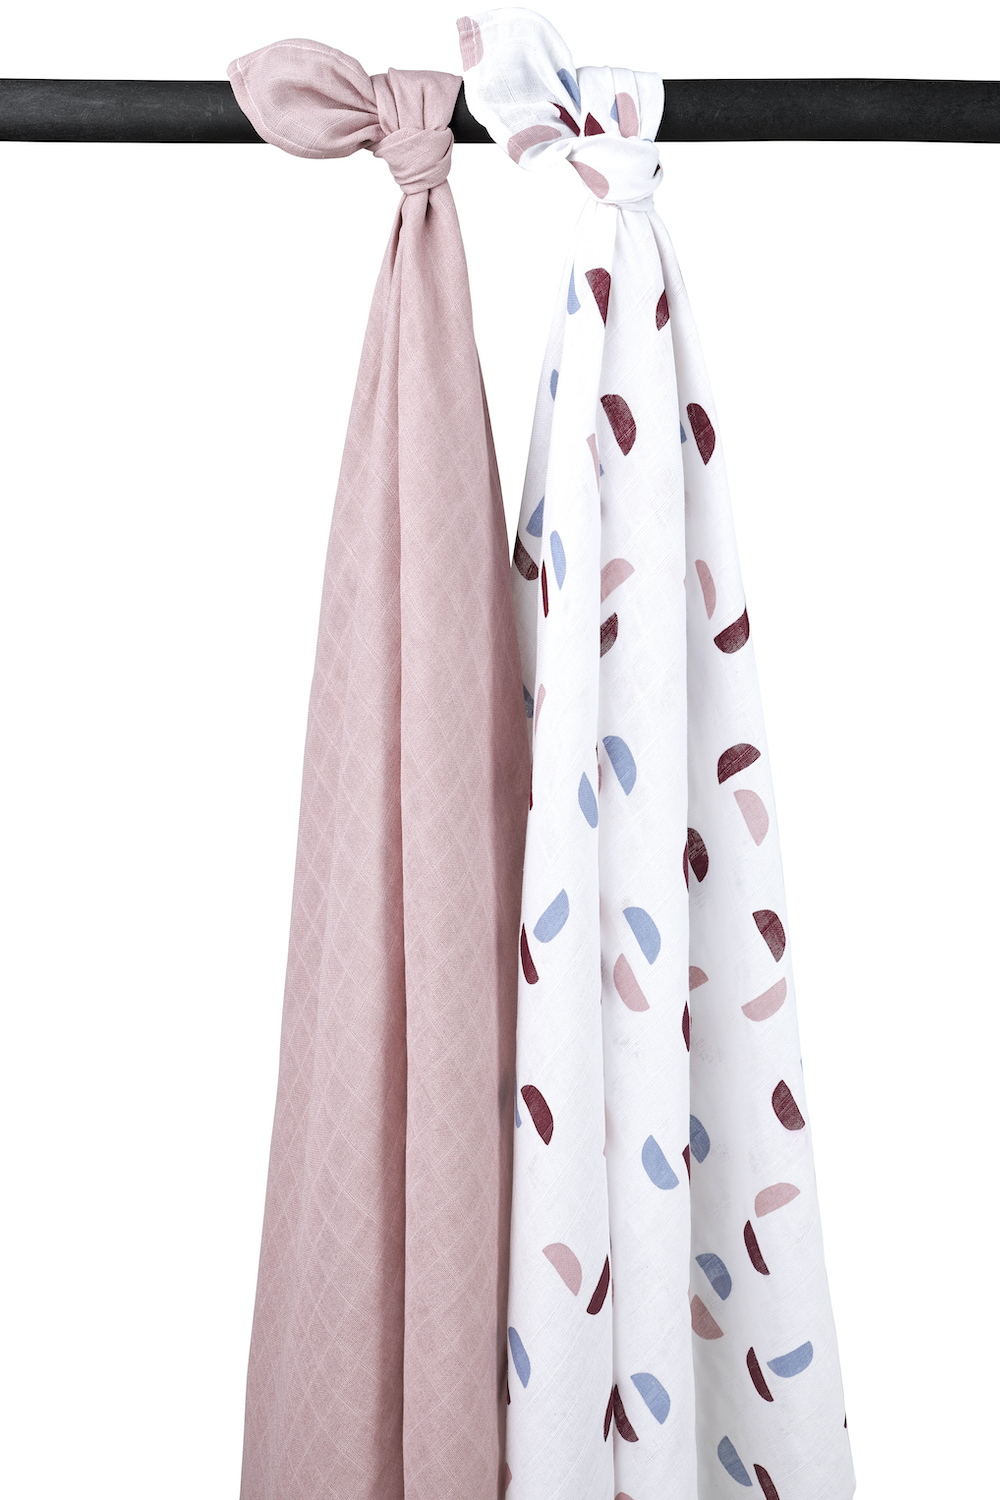 Musselin Swaddles 2-pack Shapes - Lilac - 120x120cm